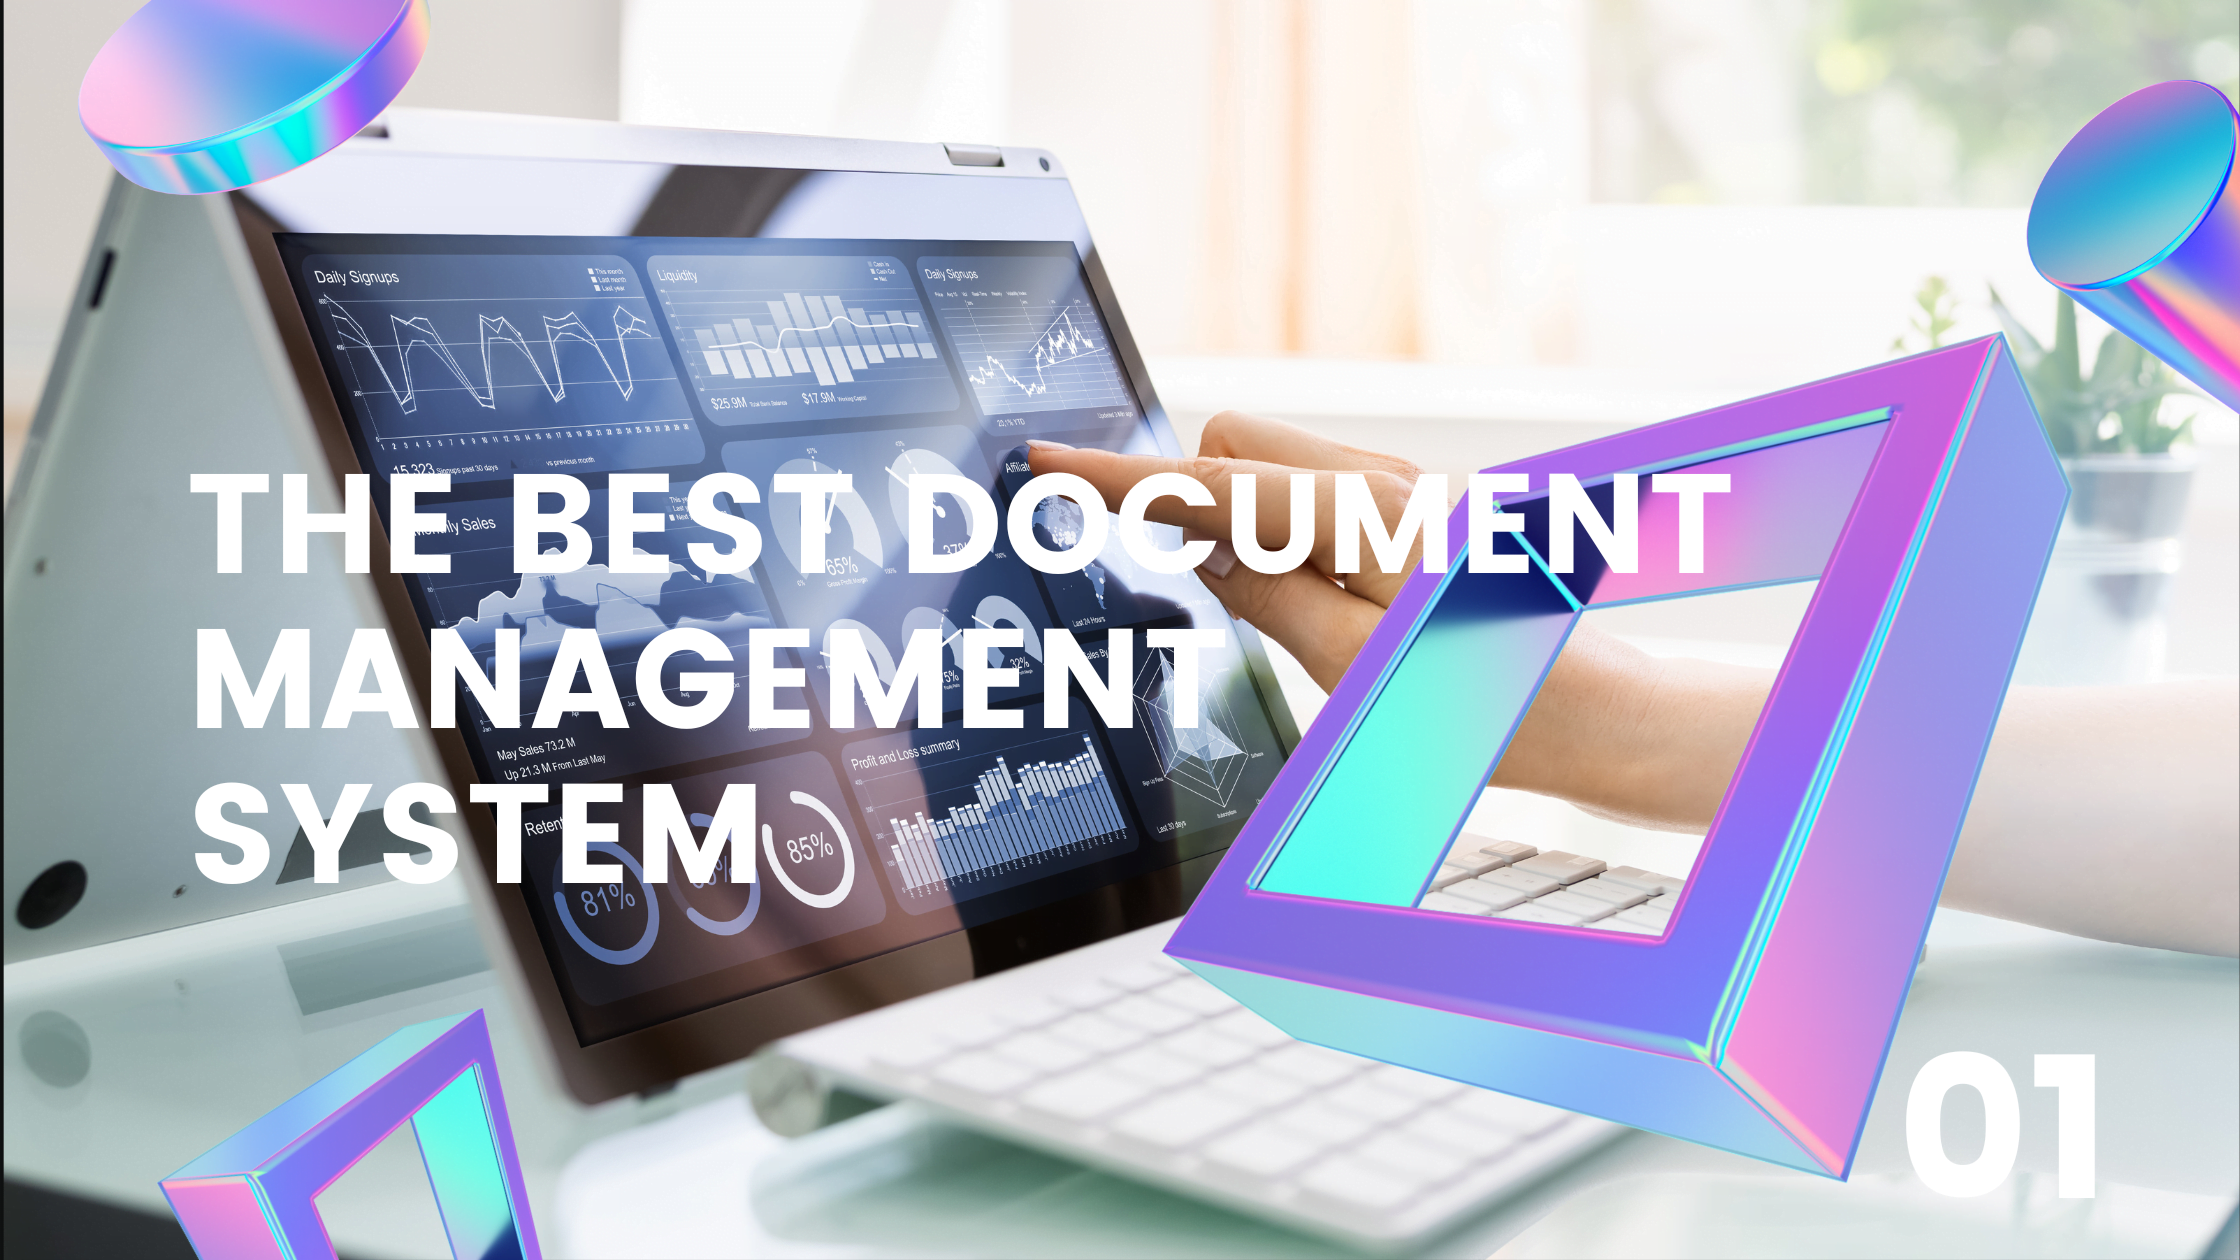 7 Traits Of The Best Document Management System – DMS